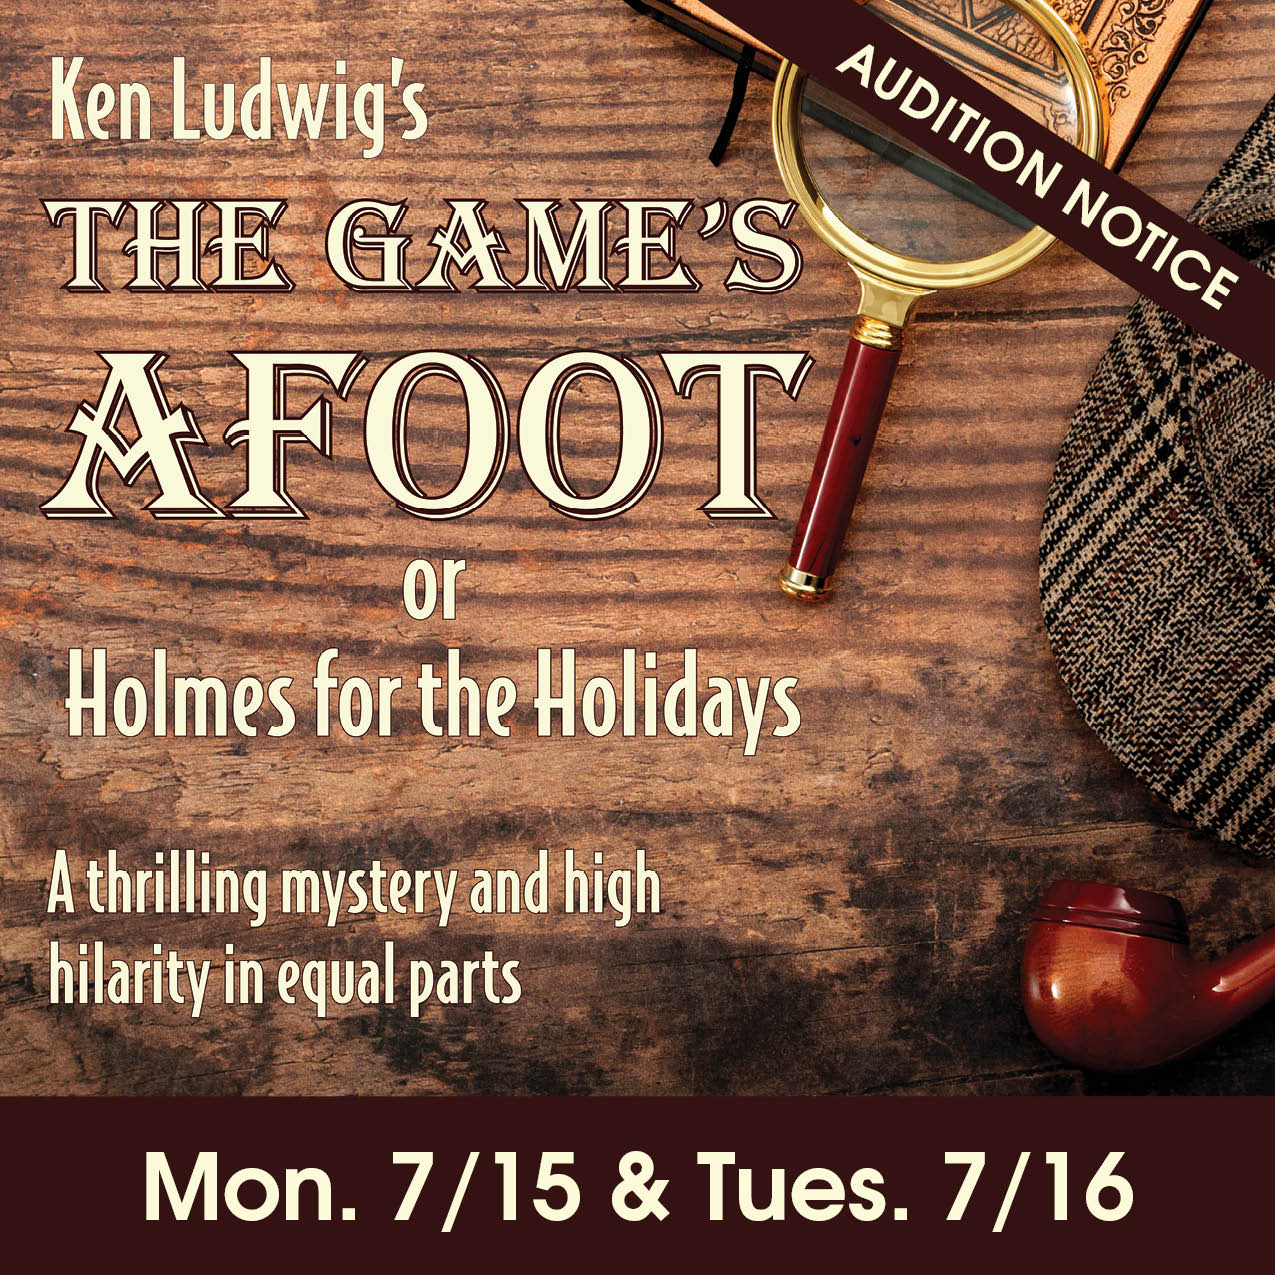 Audition Notice The Games Afoot